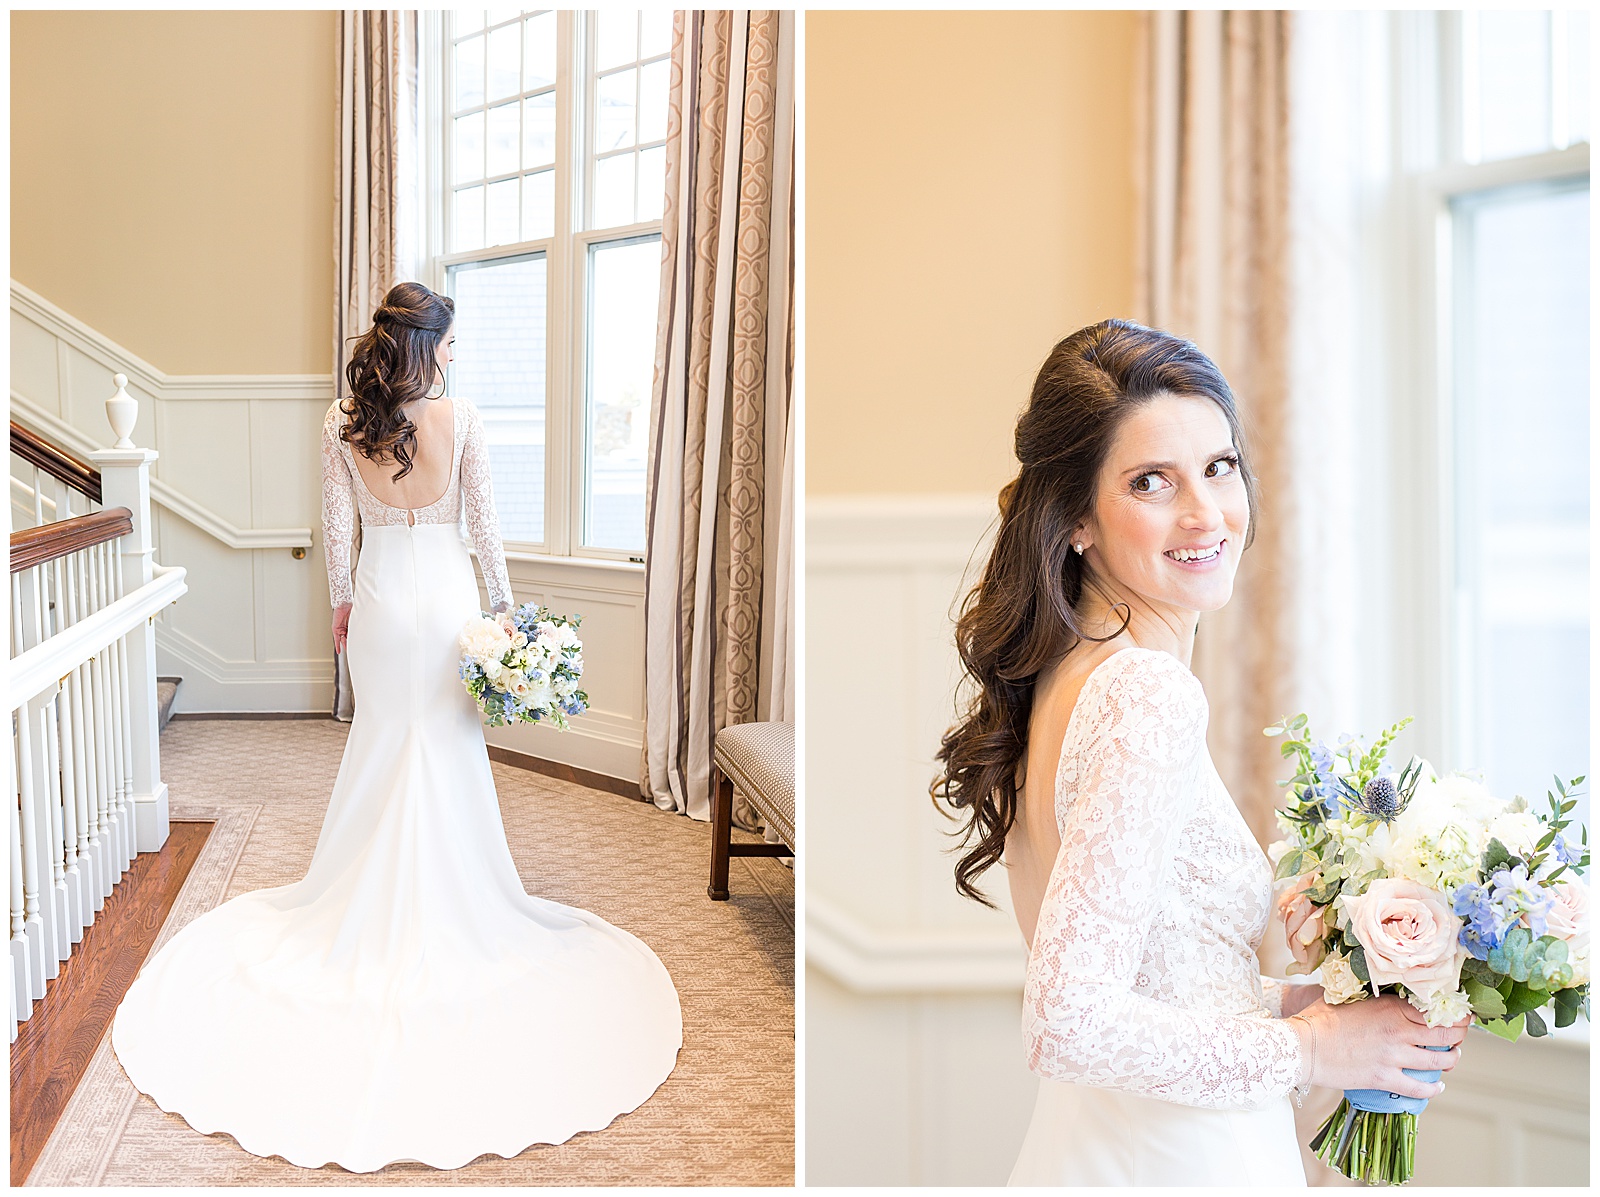 Bridal Portraits on the landing at Brae Burn Country Club